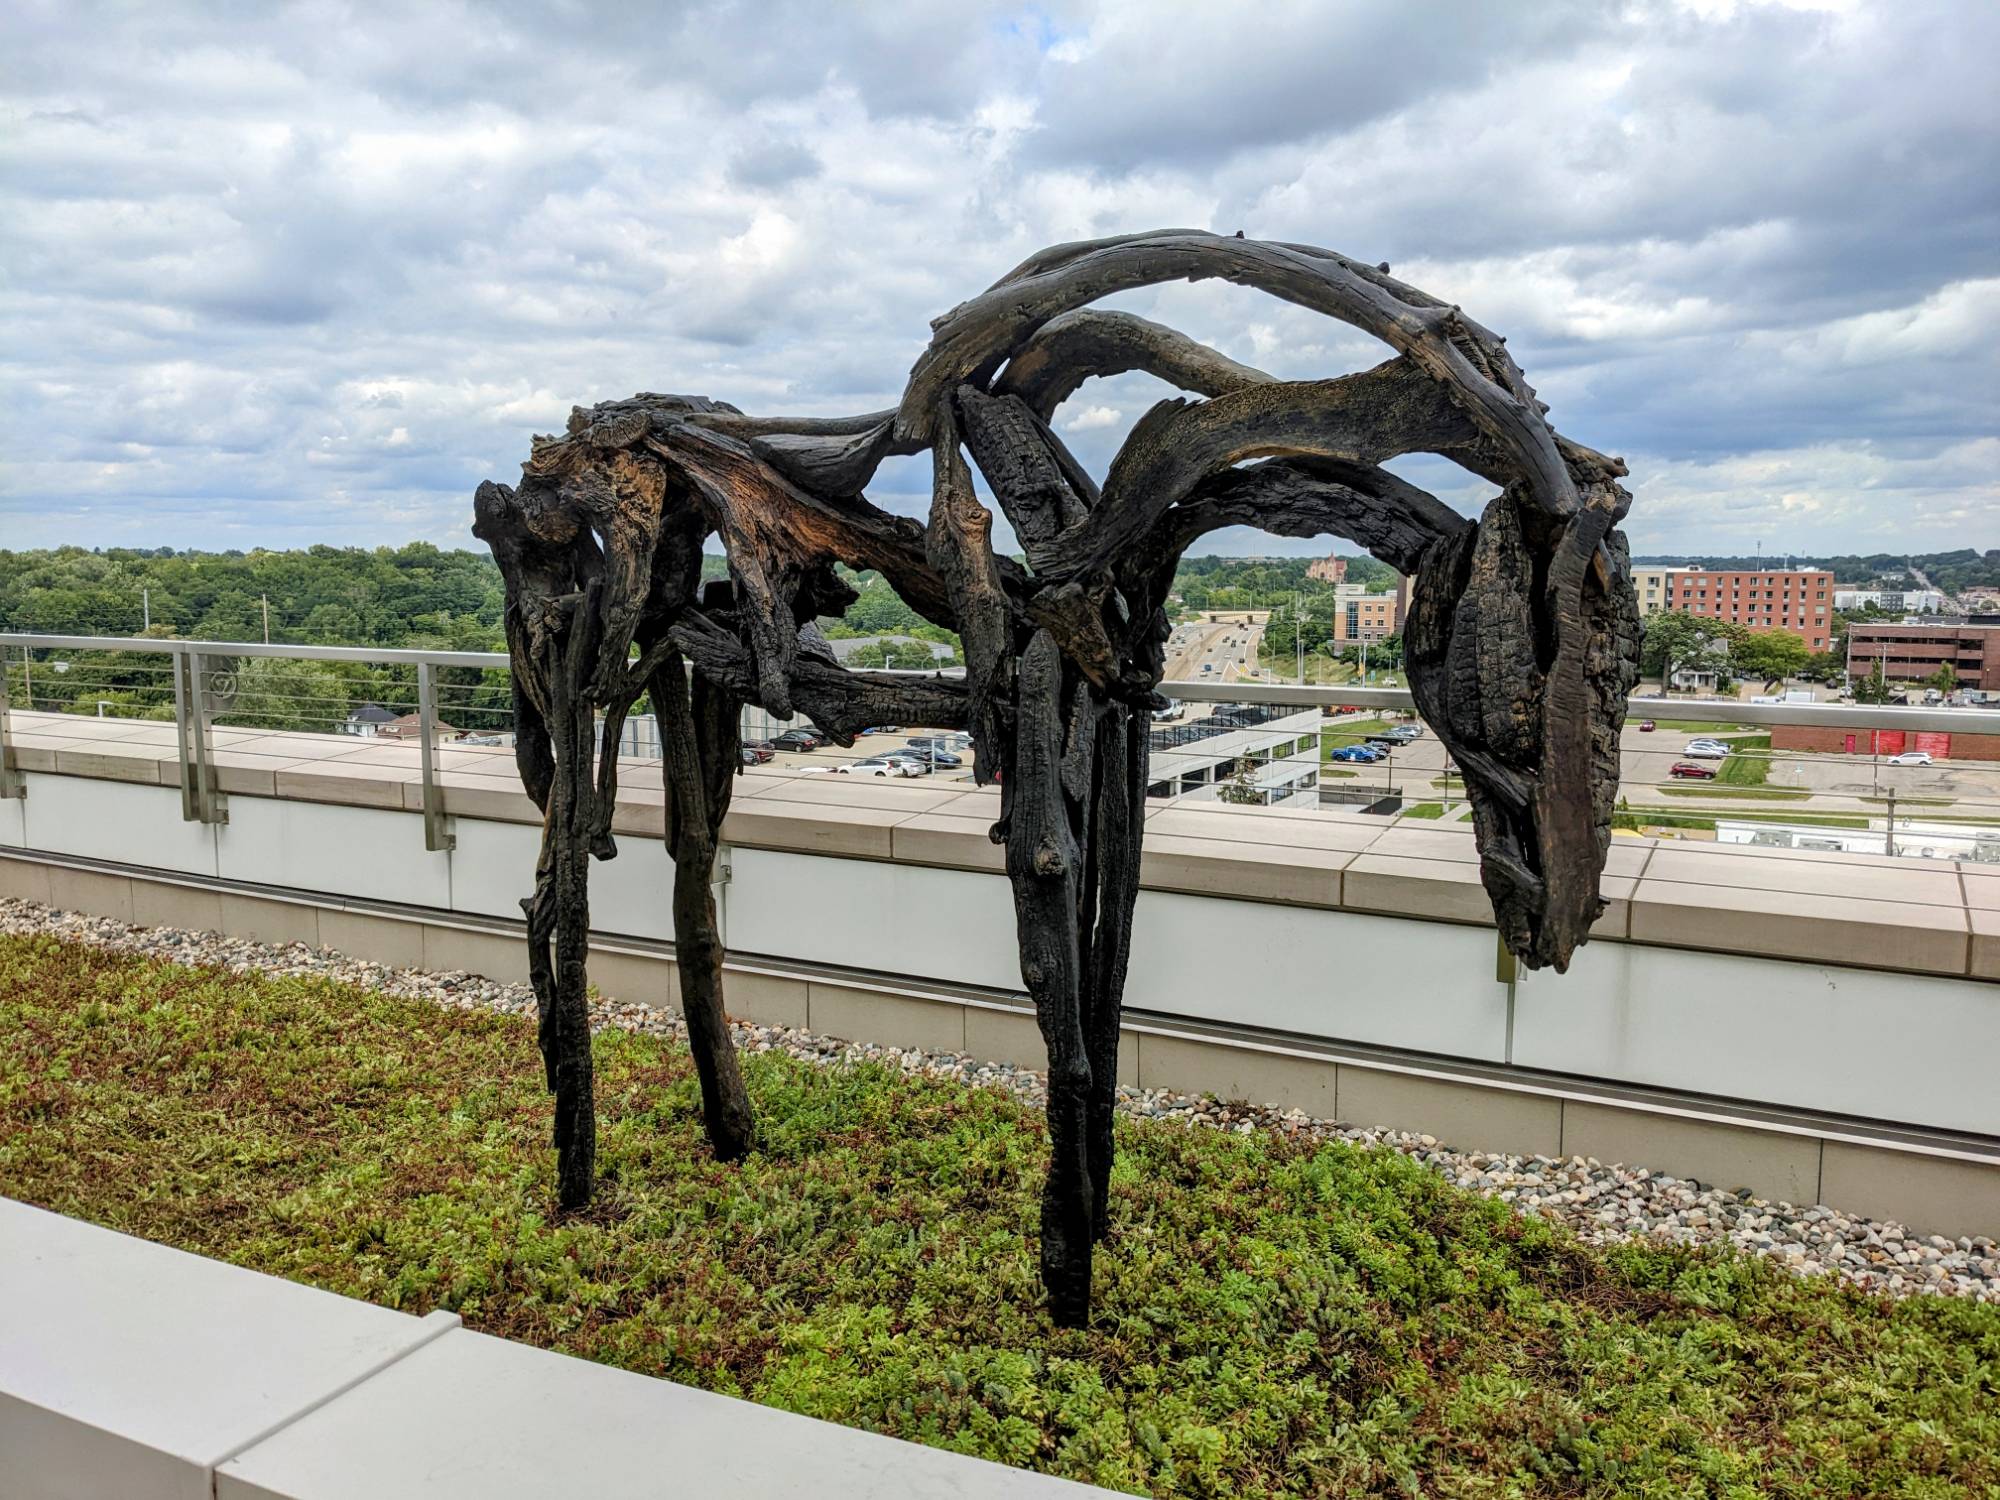 bronze cast tree branches formed into a horse